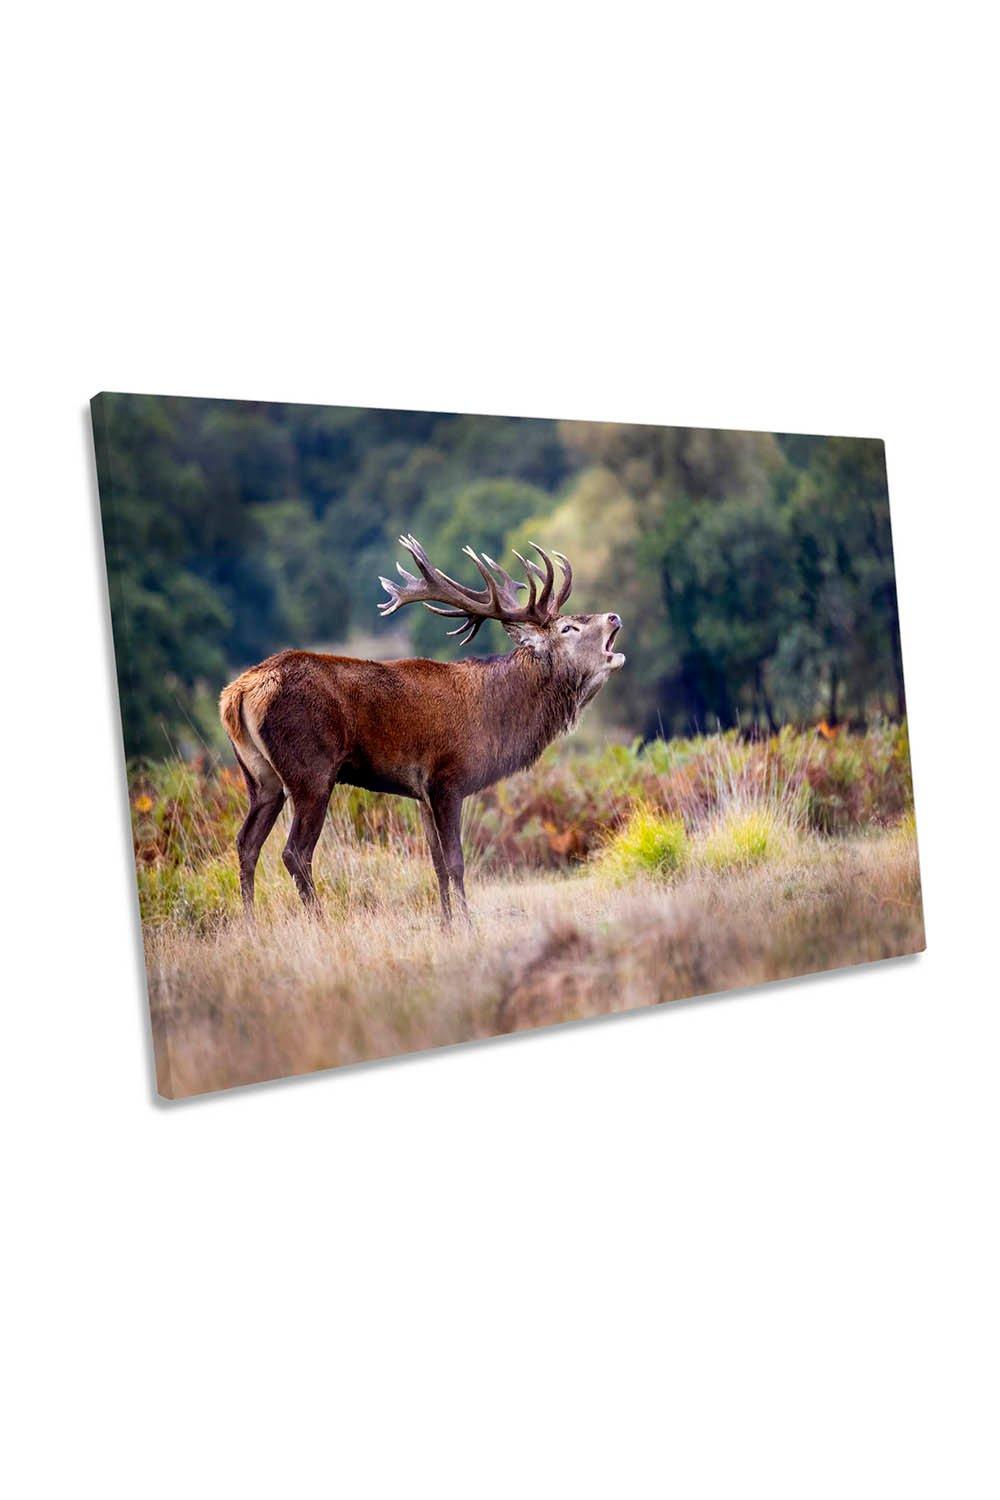 The Scream of the Deer Stag Antlers Canvas Wall Art Picture Print